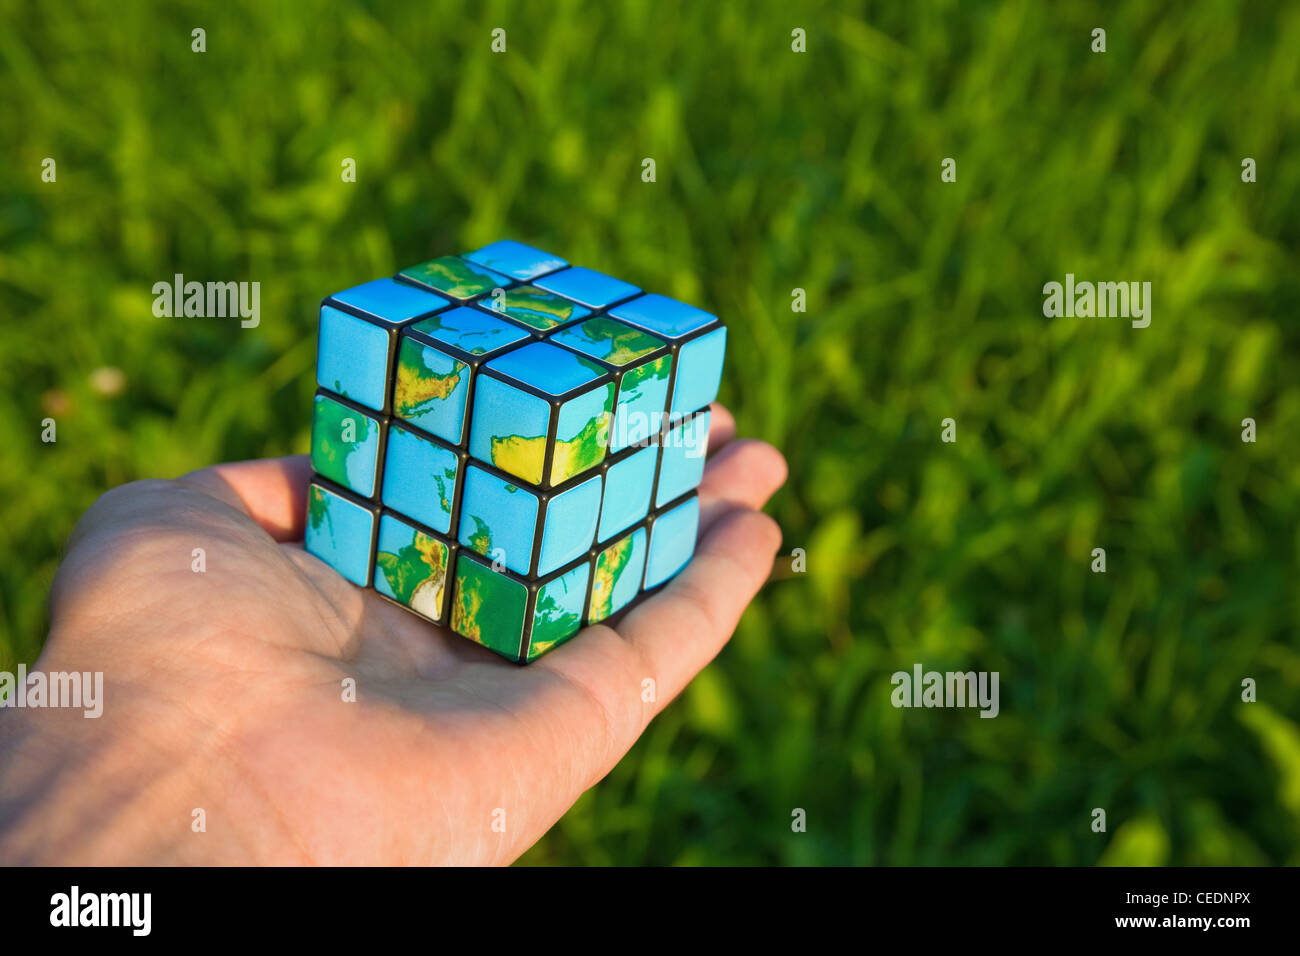 Cube in the manner of planets land on palm on background of the herb Stock Photo